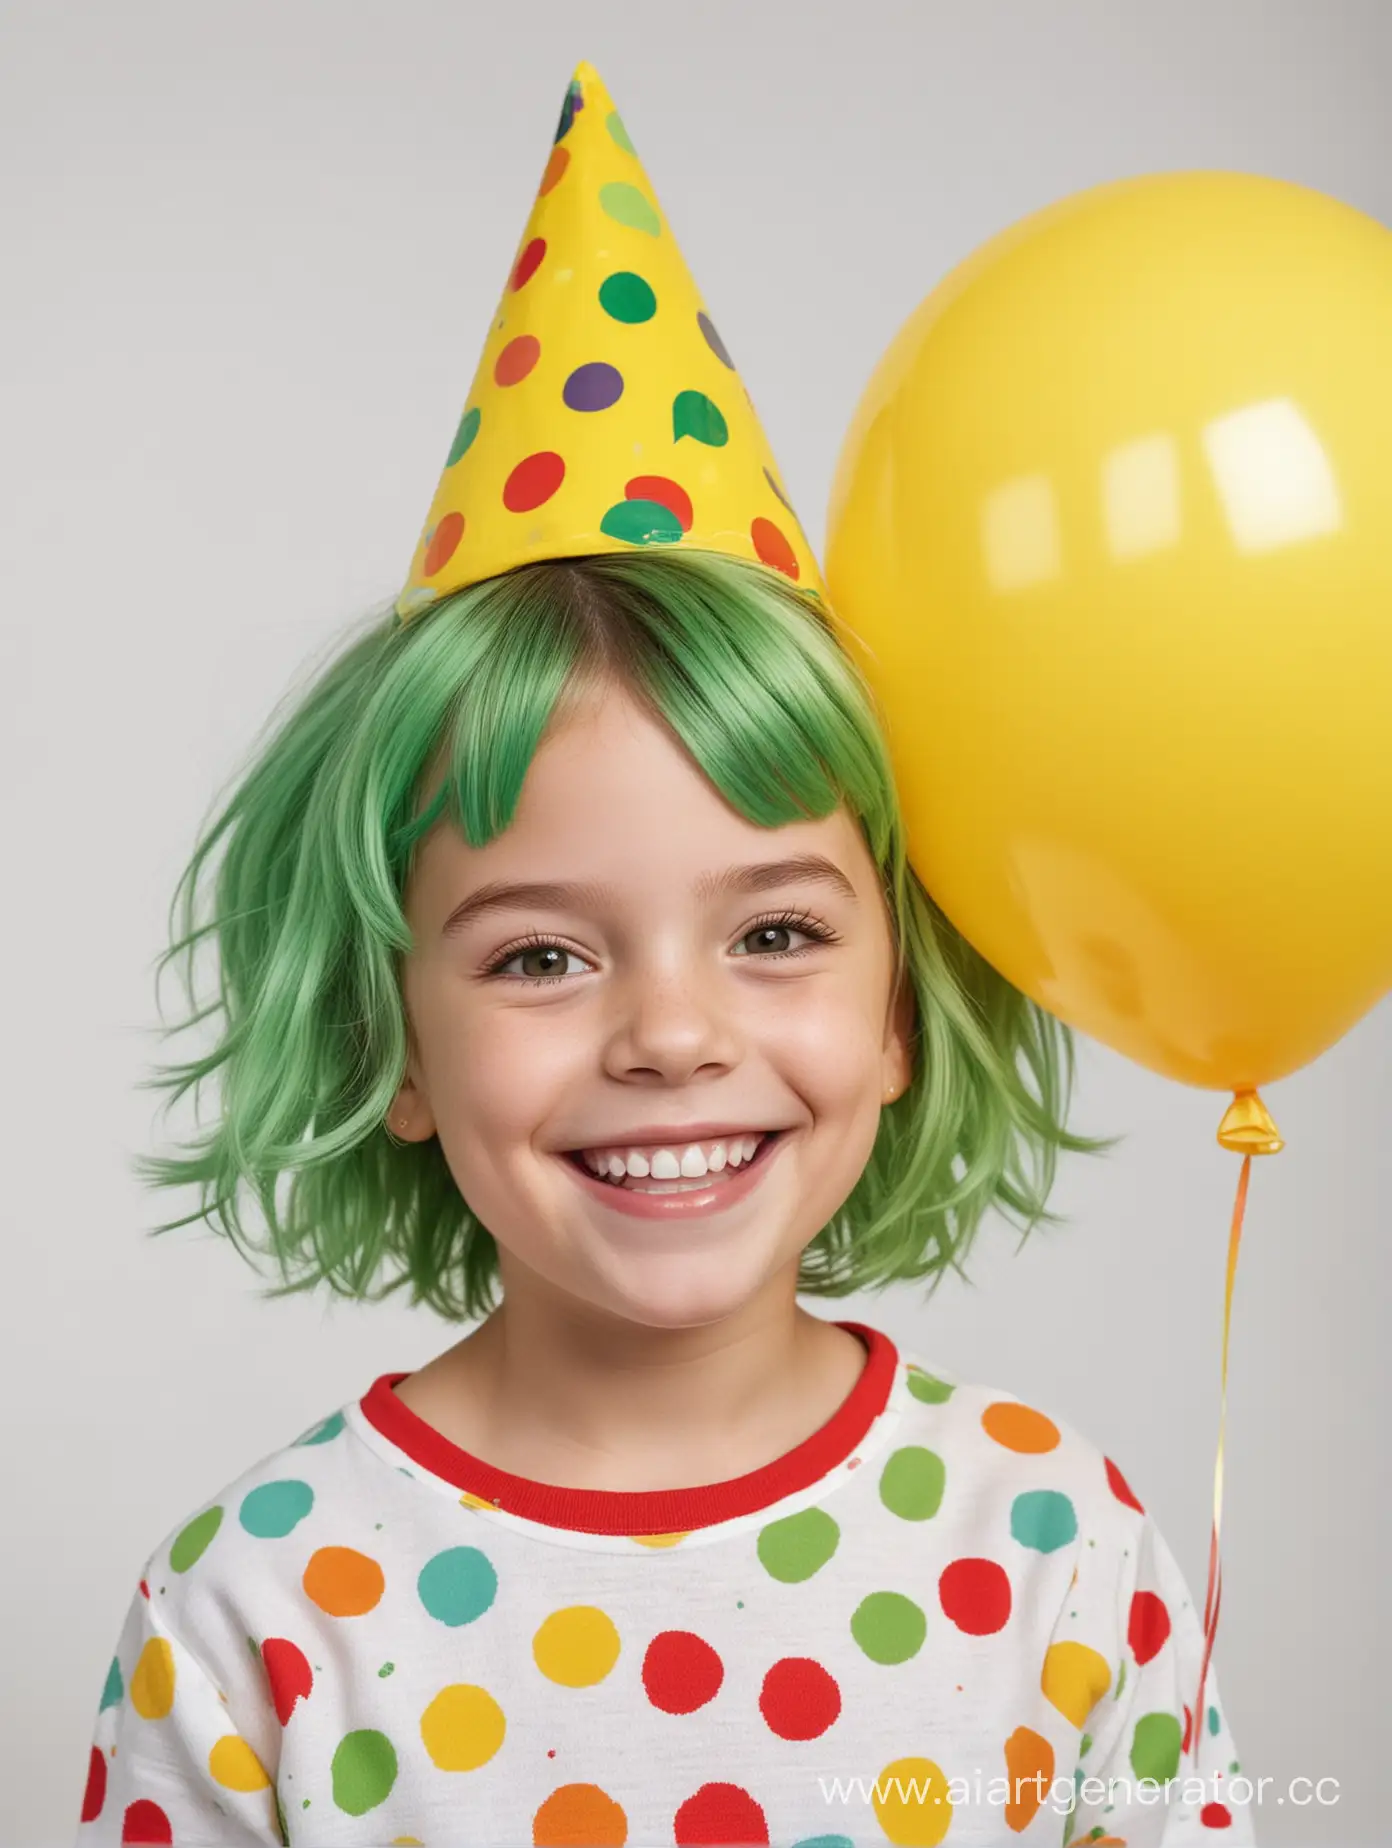 A high-quality, sharp-focused photo of a light-skin  smiling European kid girl with bright green hair, with red balloon in hand . She is adorned with a large, multicolored polka-dotted yellow party cone on her head, a yellow sweatshirt, and white shoes,  with a wide, happy smile. The background is a clean, white canvas that emphasizes the child's lively presence, photo from below, soft studio light